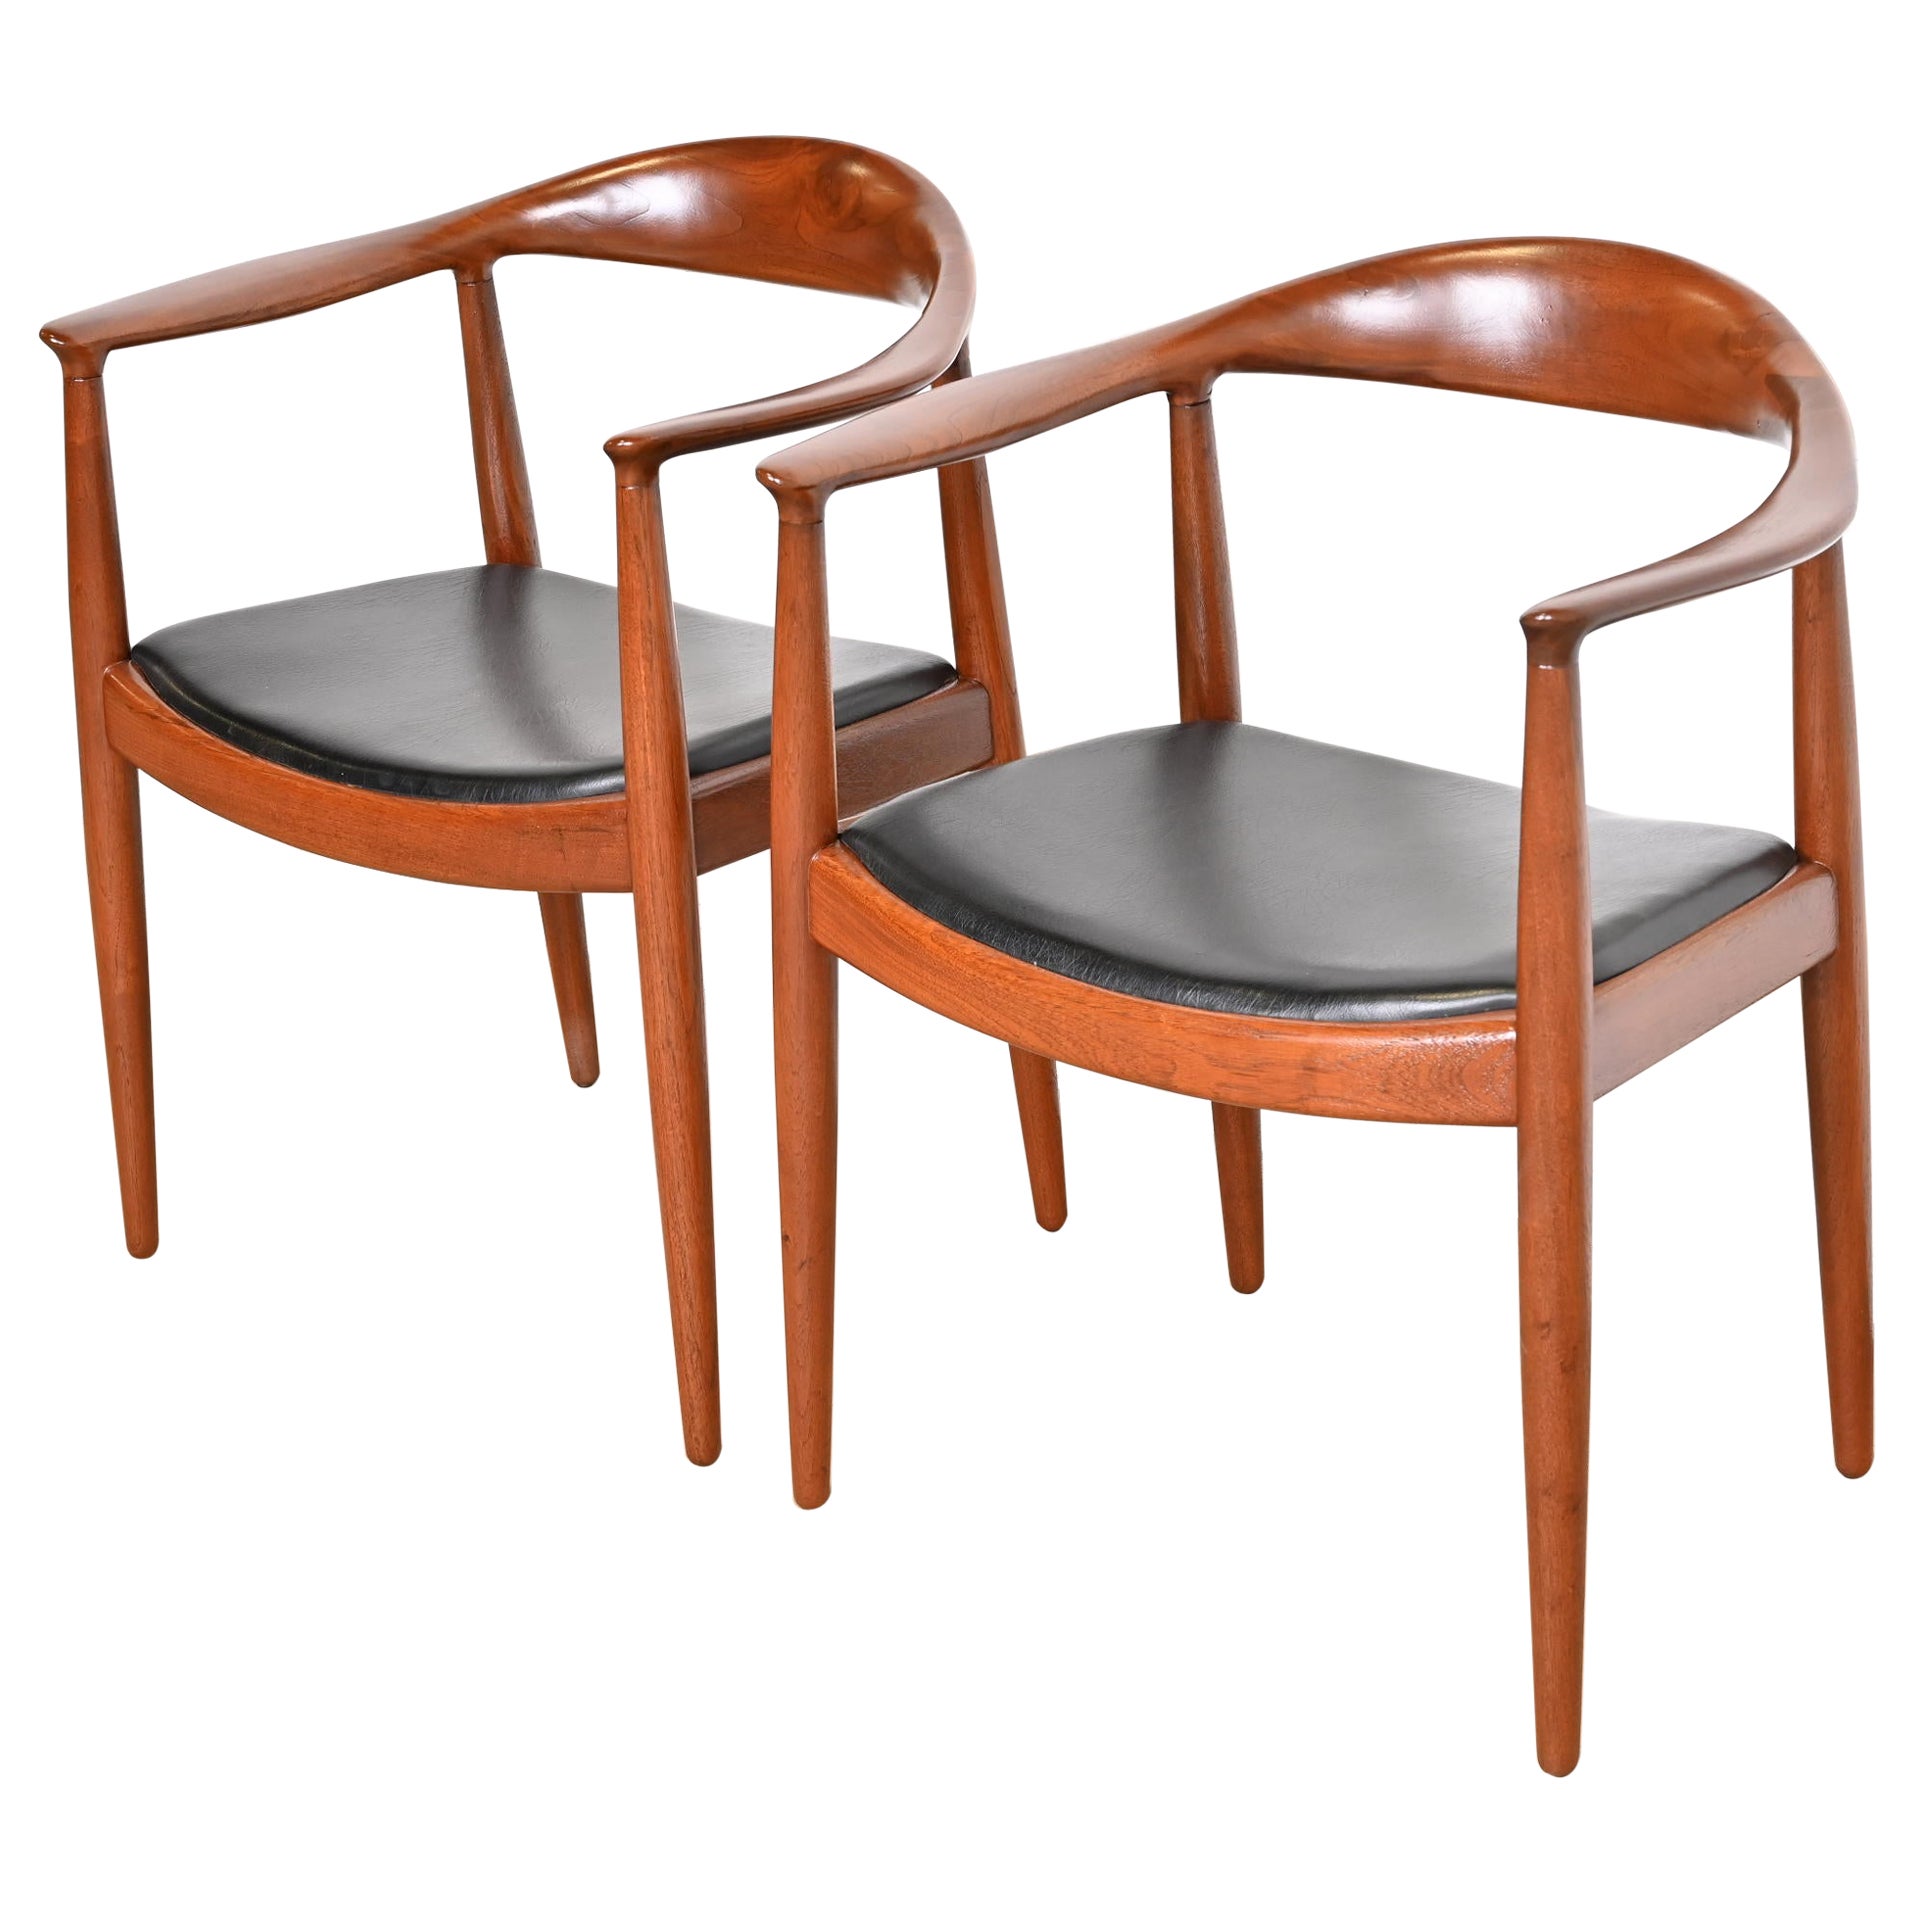 Hans Wegner for Johannes Hansen "The Chair" Teak and Leather Round Chairs, Pair